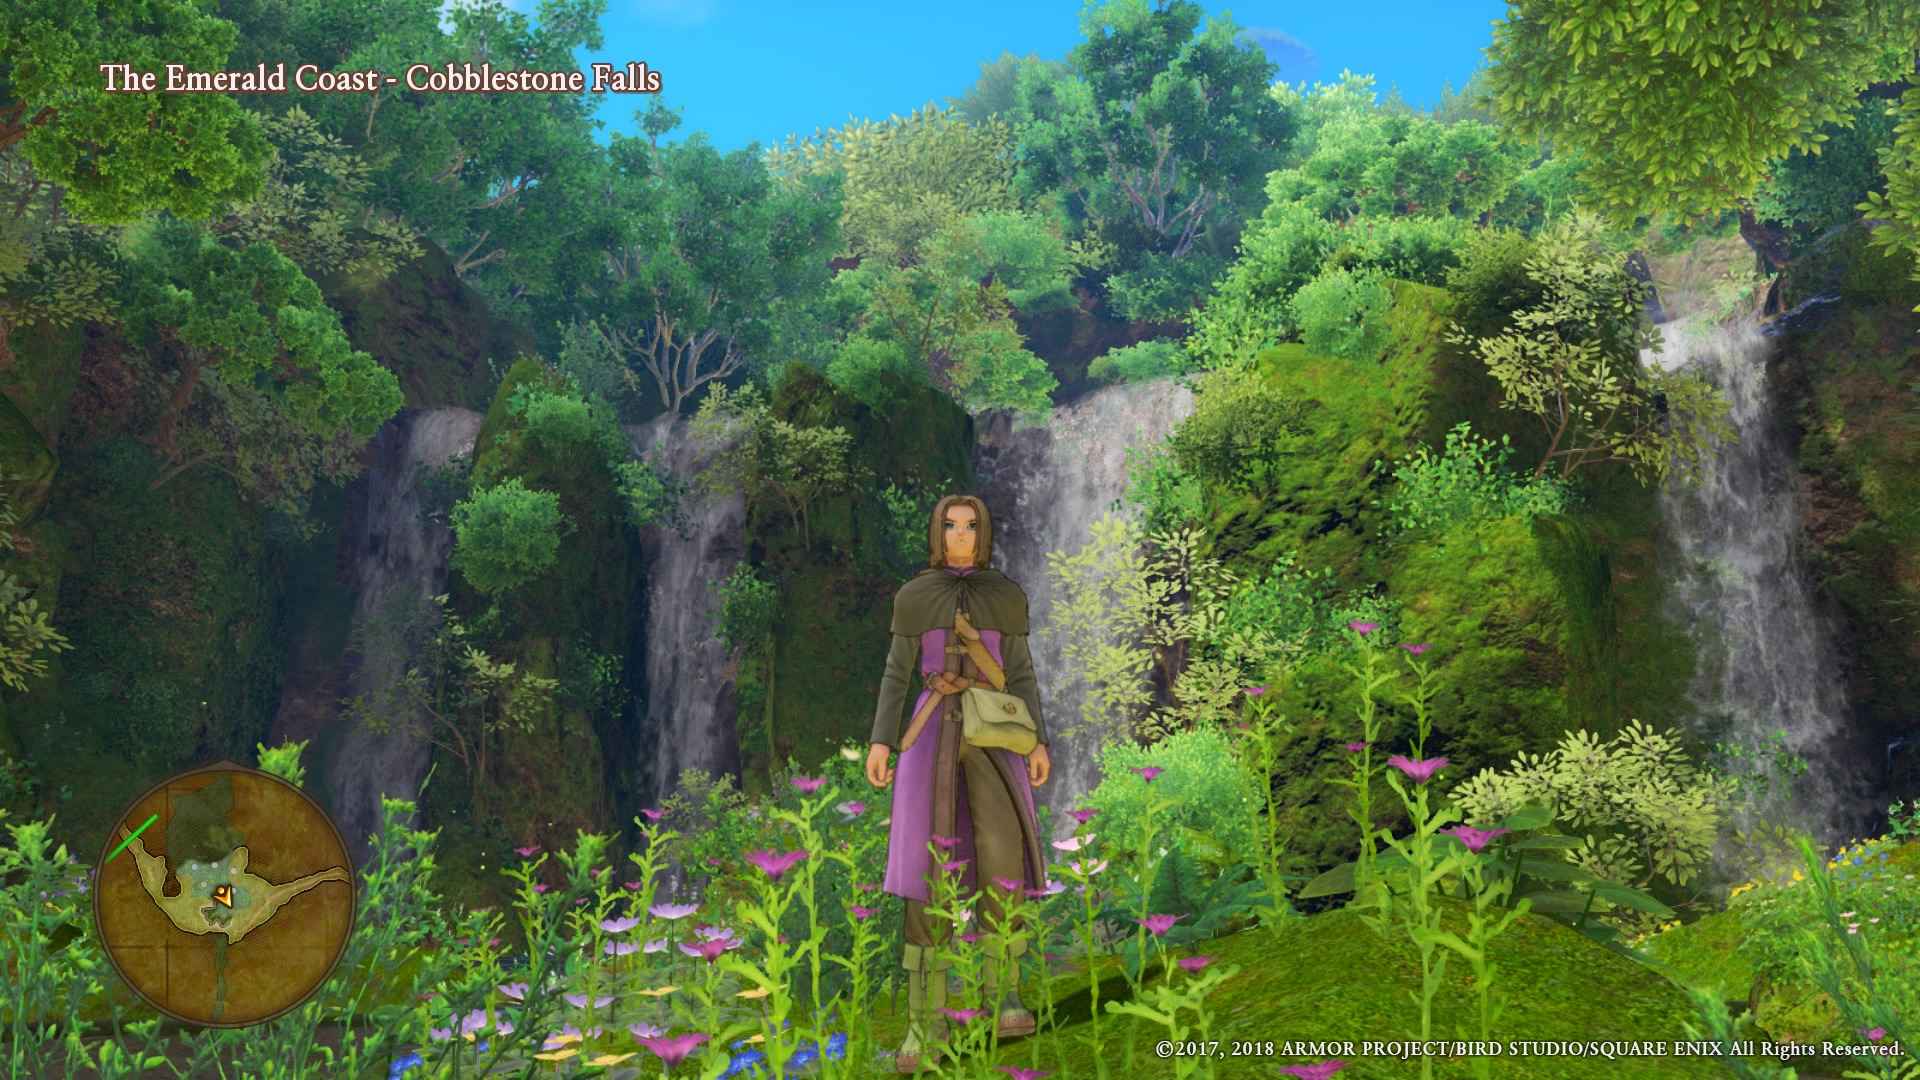 How Dragon Quest XI S: Echoes of an Elusive Age take us to a